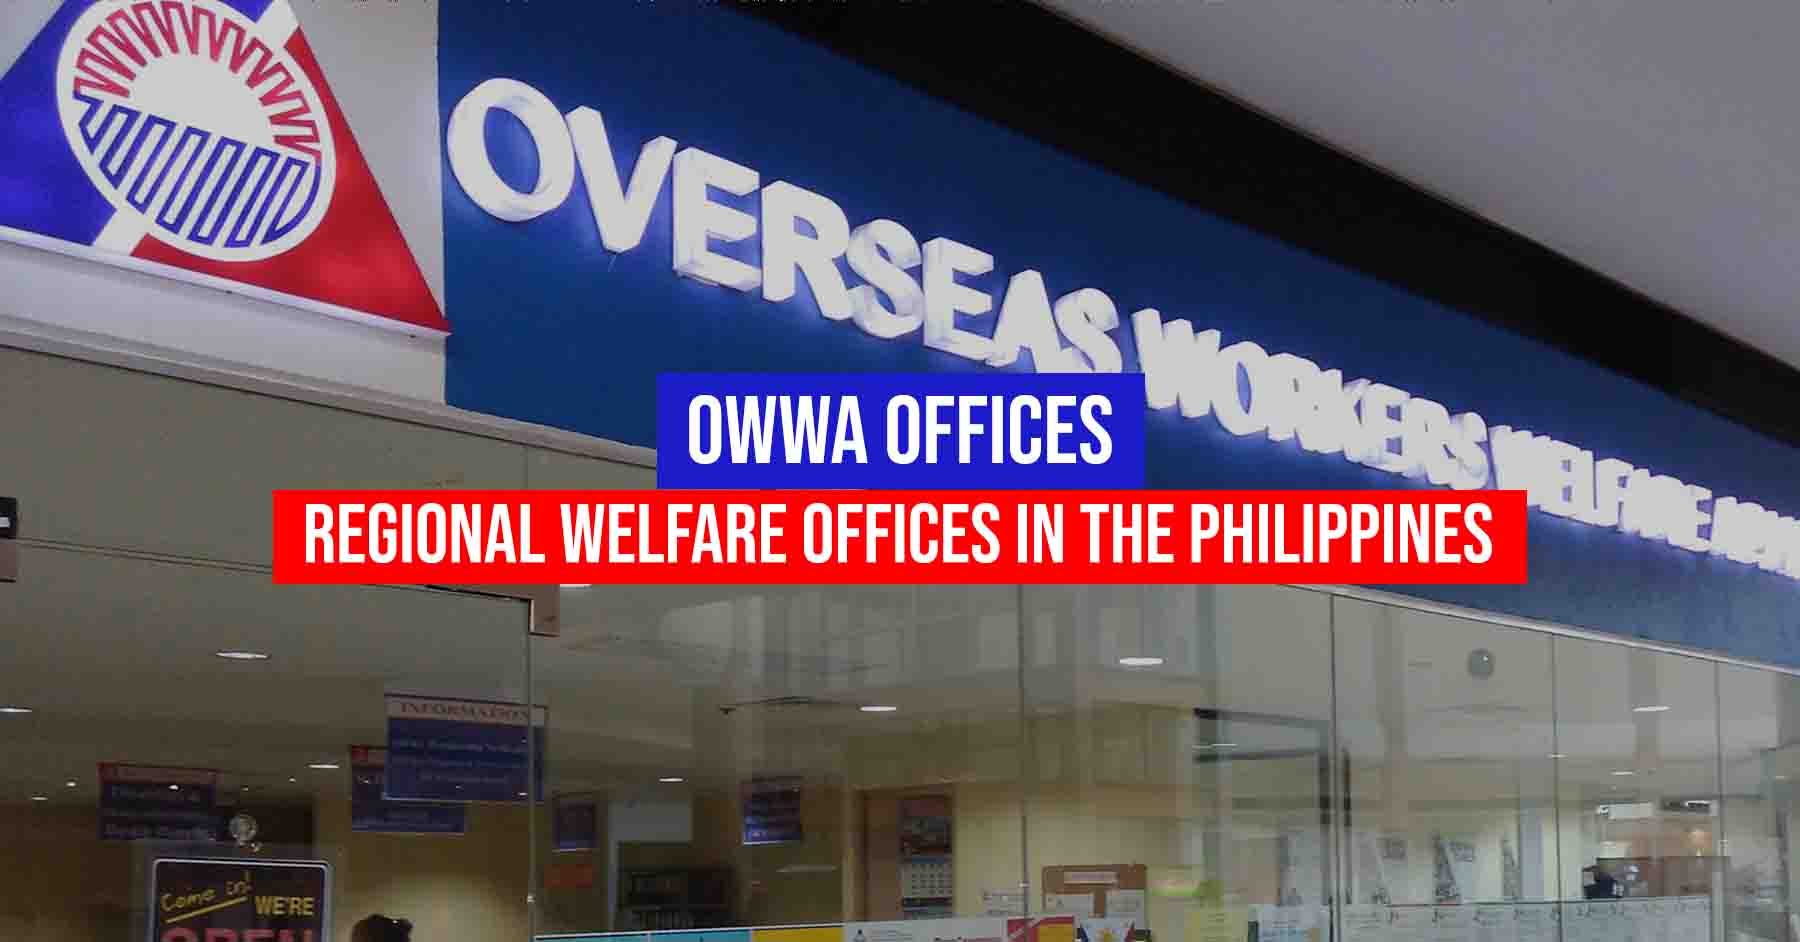 owwa offices in philippines